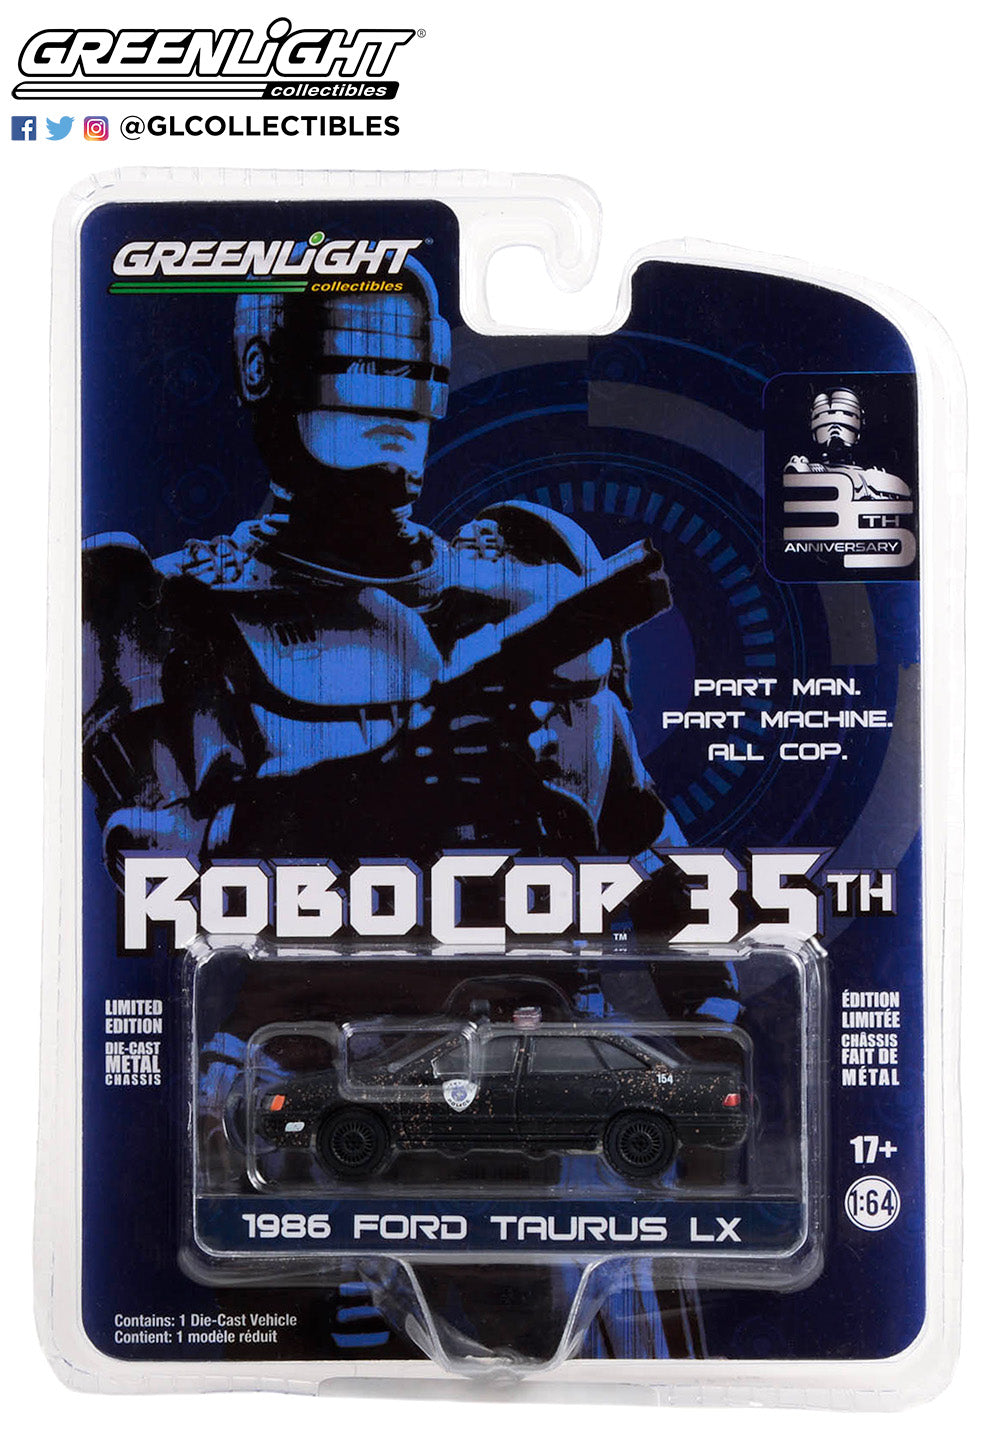 Anniversary Collection Series 15 - 1986 Ford Taurus LX - Detroit Metro West Police - Weathered - RoboCop 35th Anniversary